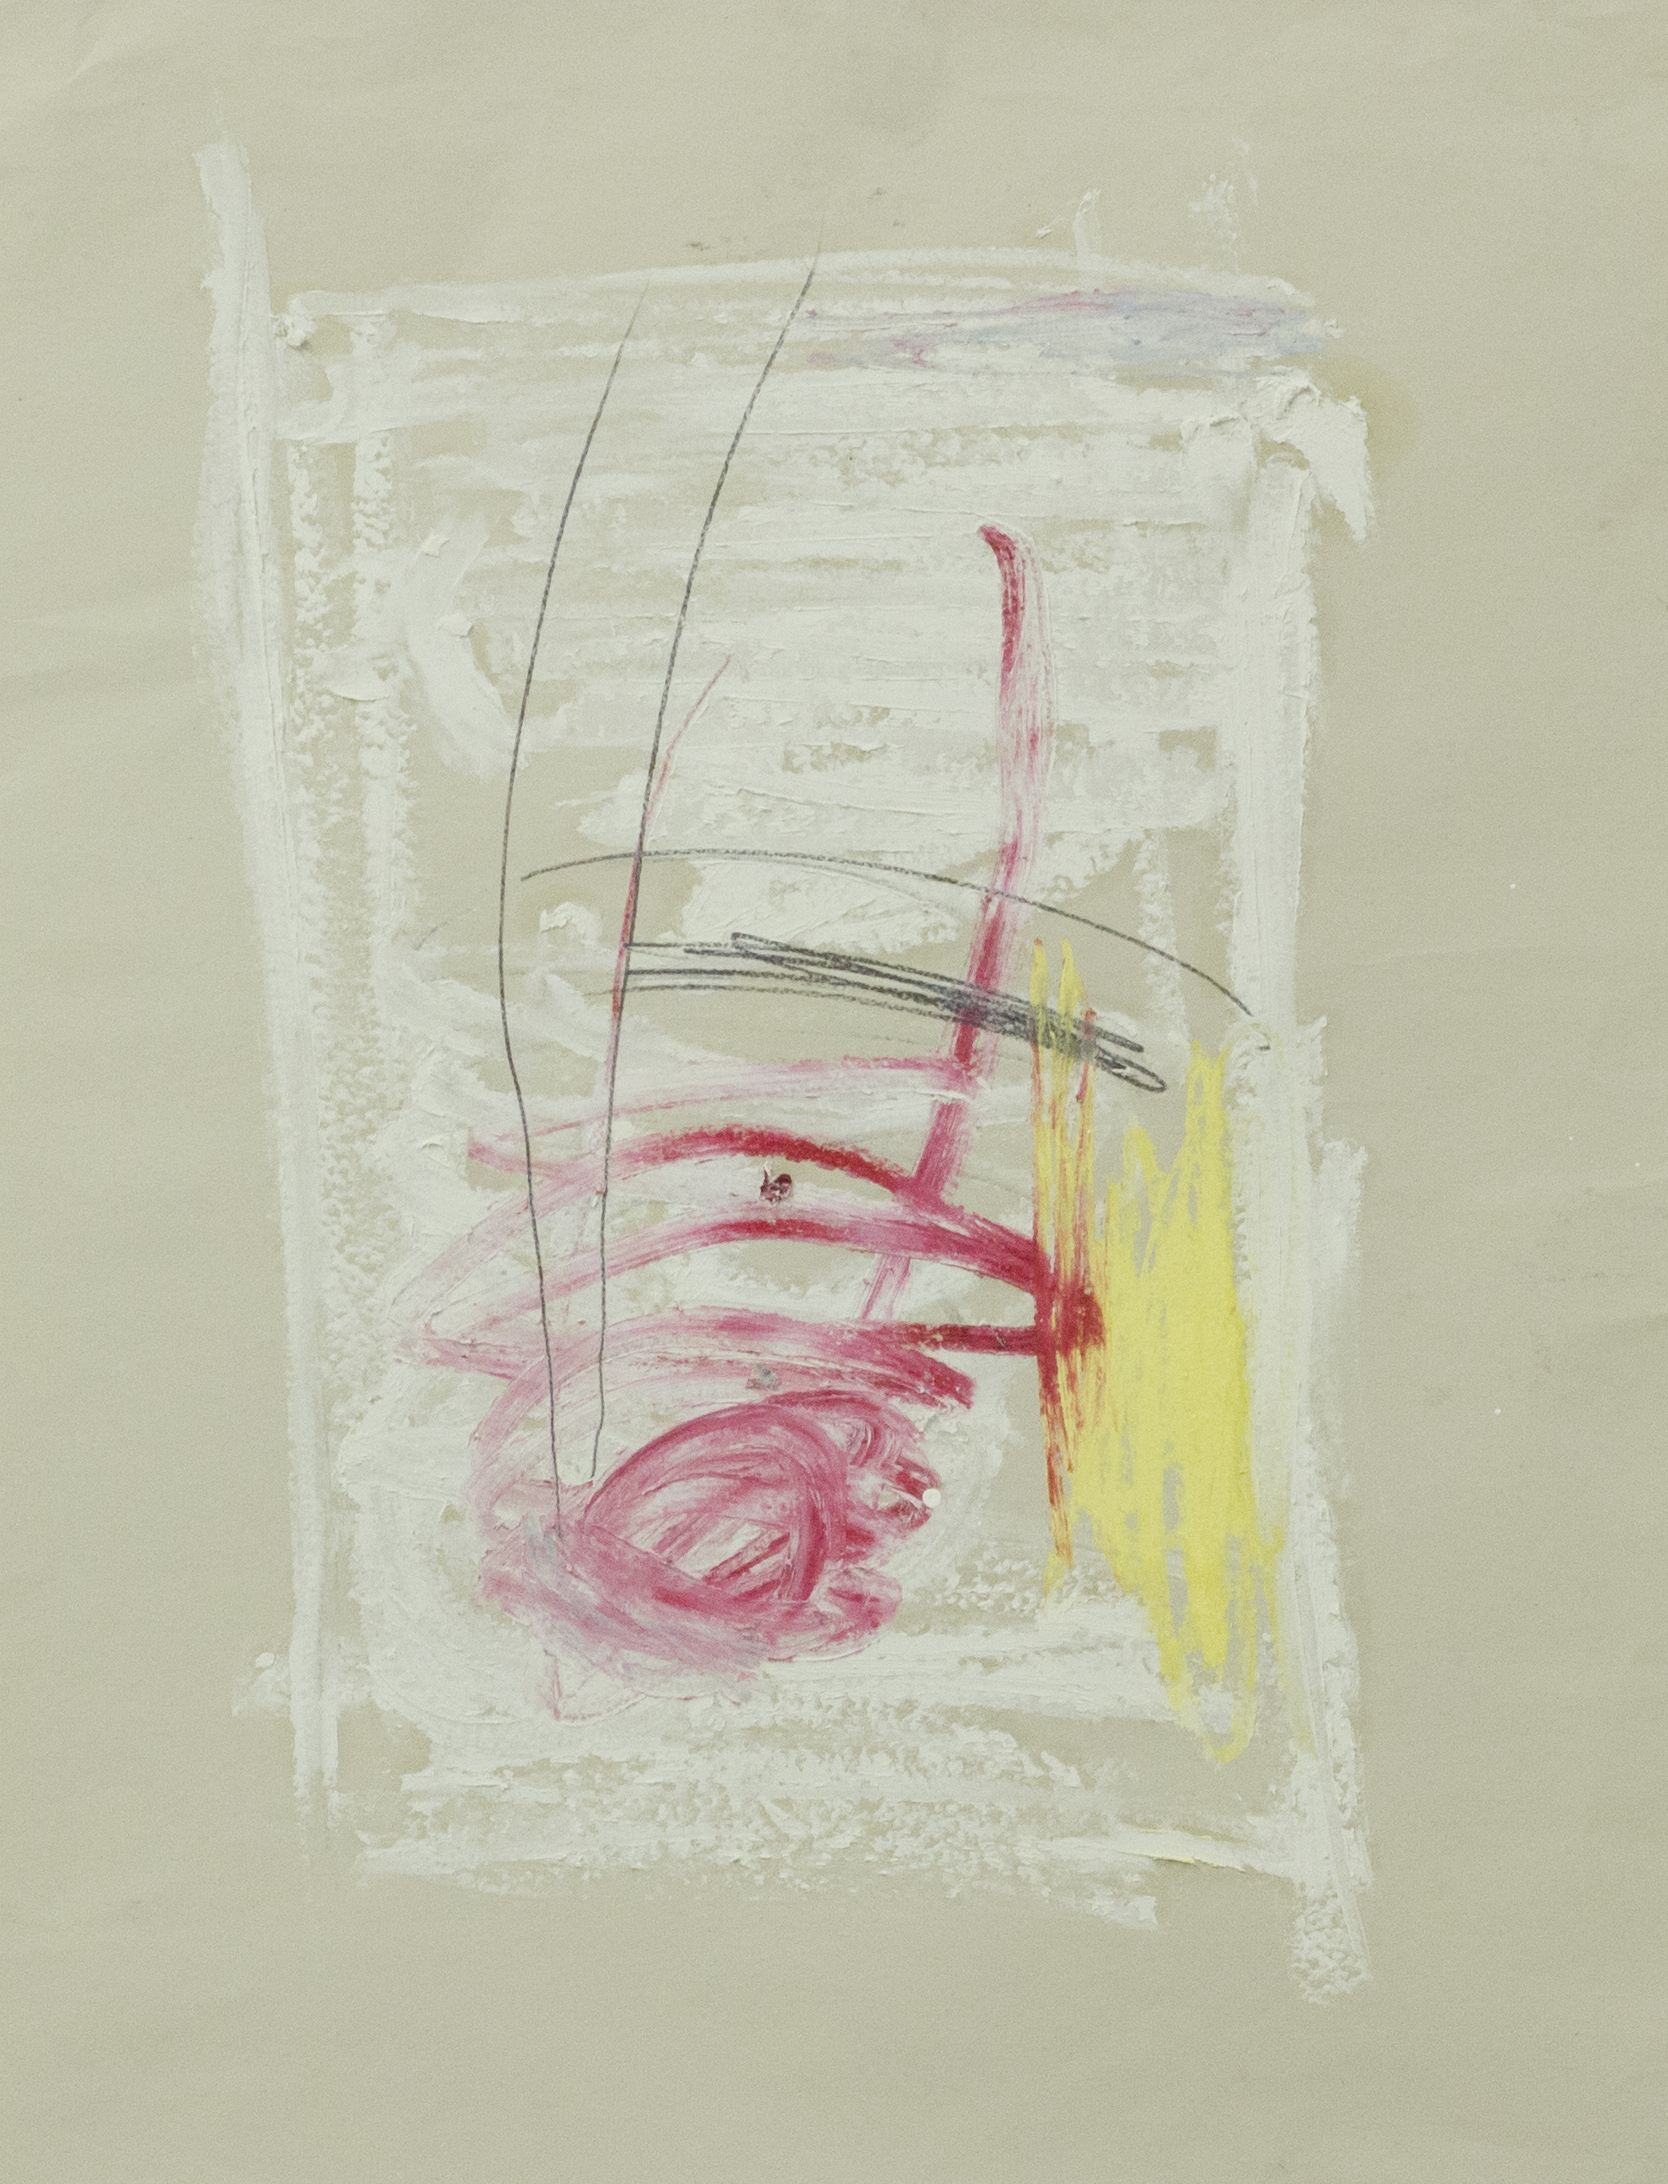   Everything in a Place Outside of Themselves  , 2015    24 x 18 inches   Oil Stick, Pastel and Graphite on News Print 